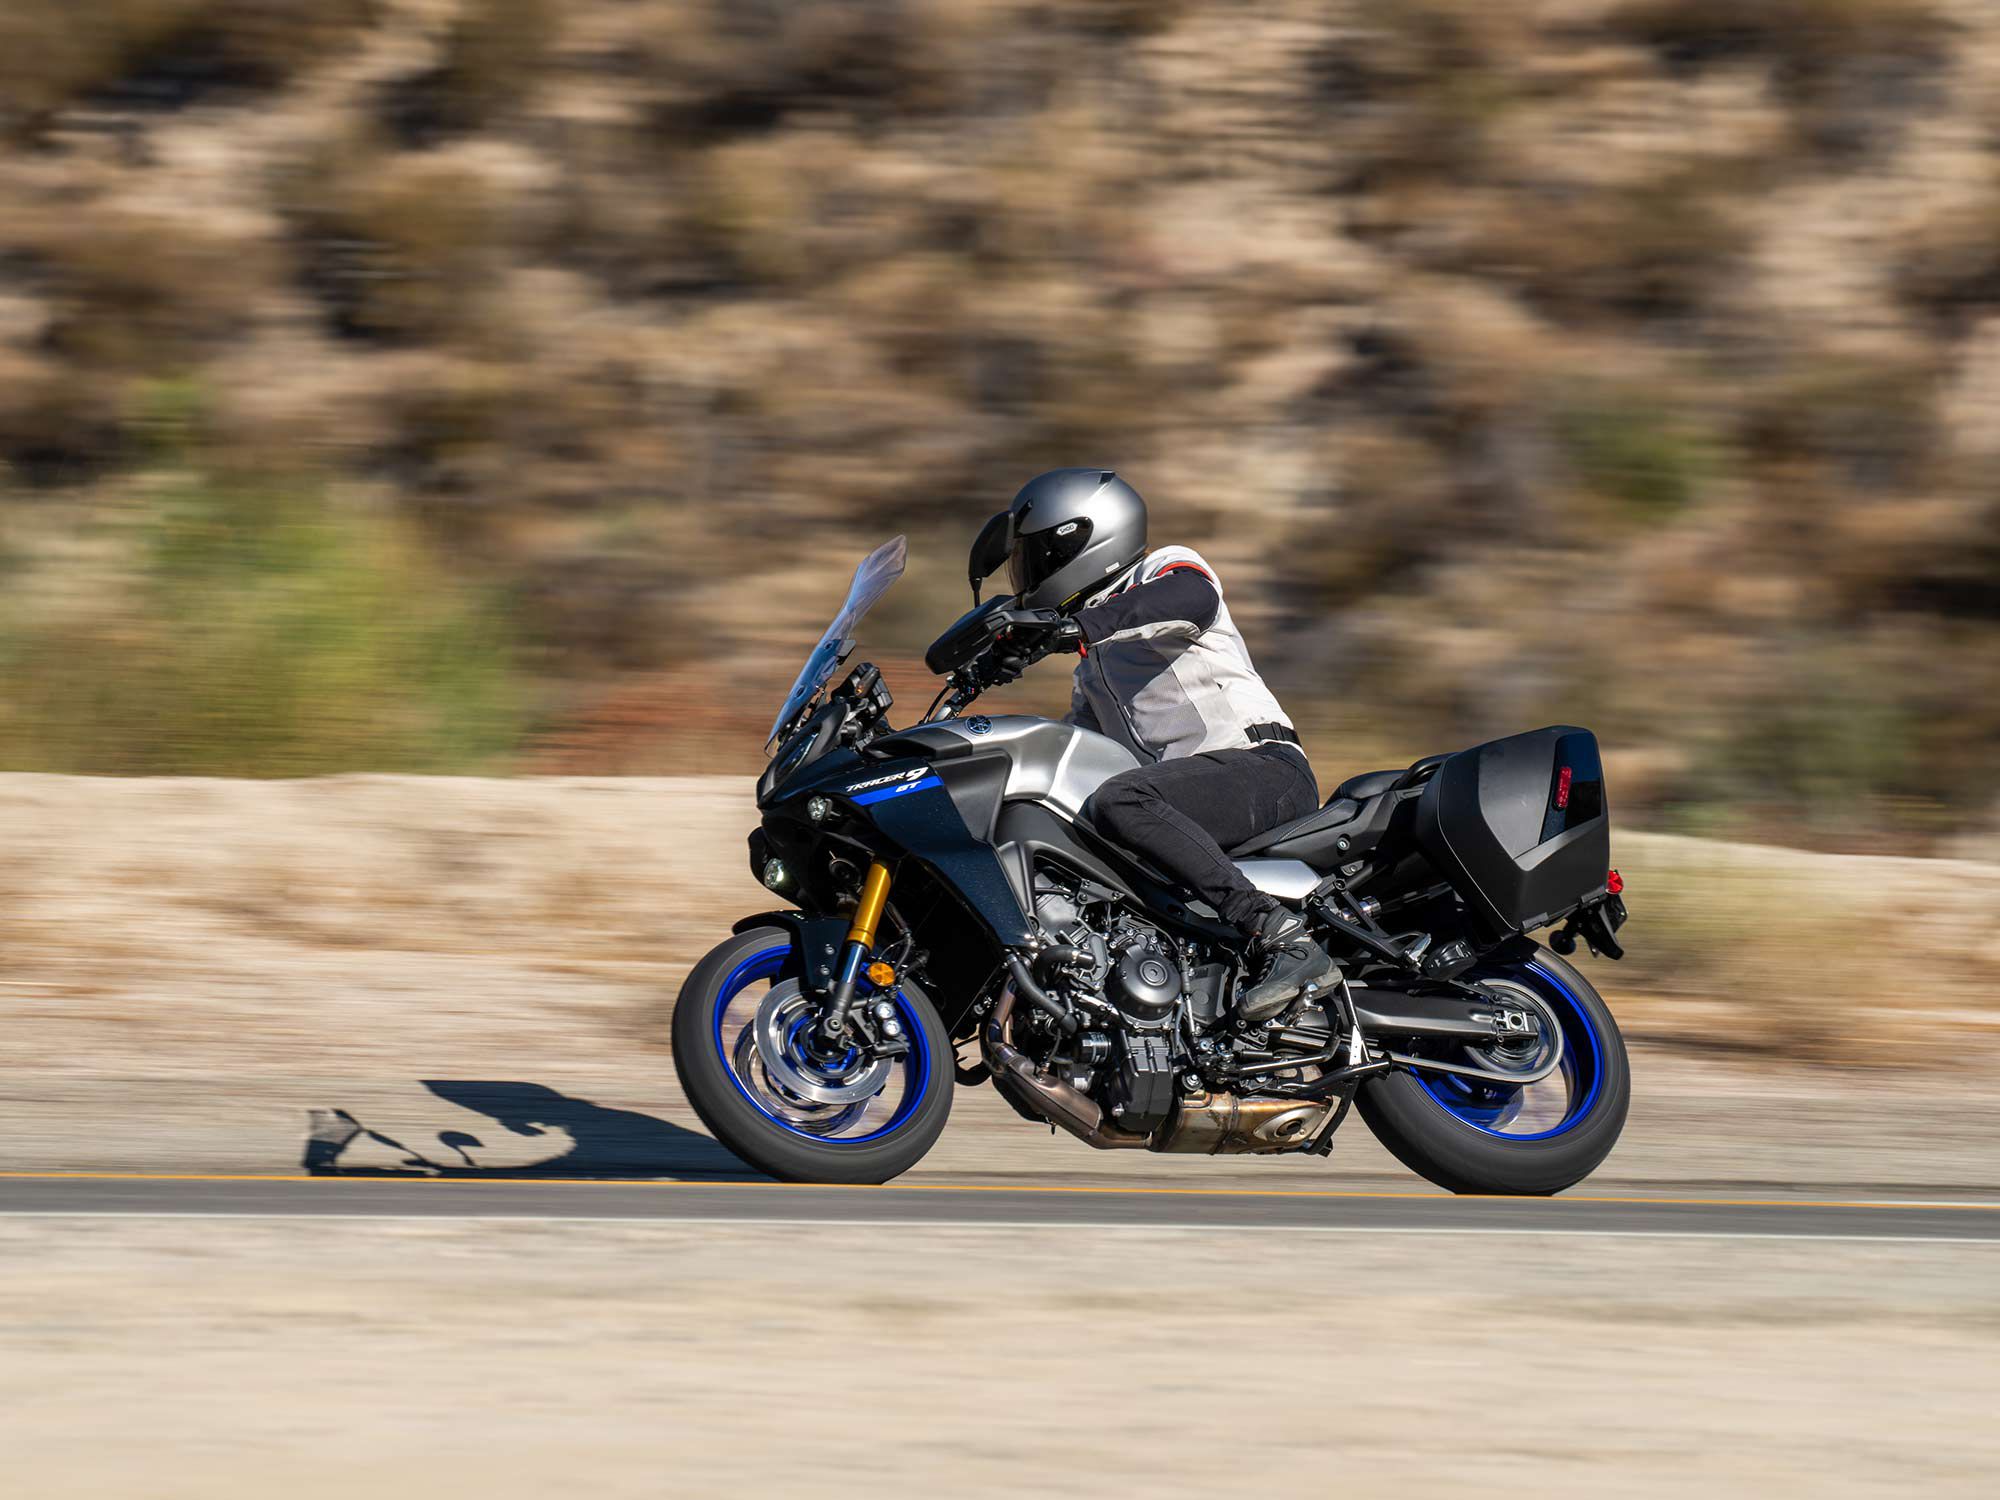 Yamaha elevates the pedigree of its 2022 Tracer 9 GT sport-touring bike by infusing high-end features like semi-active suspension.